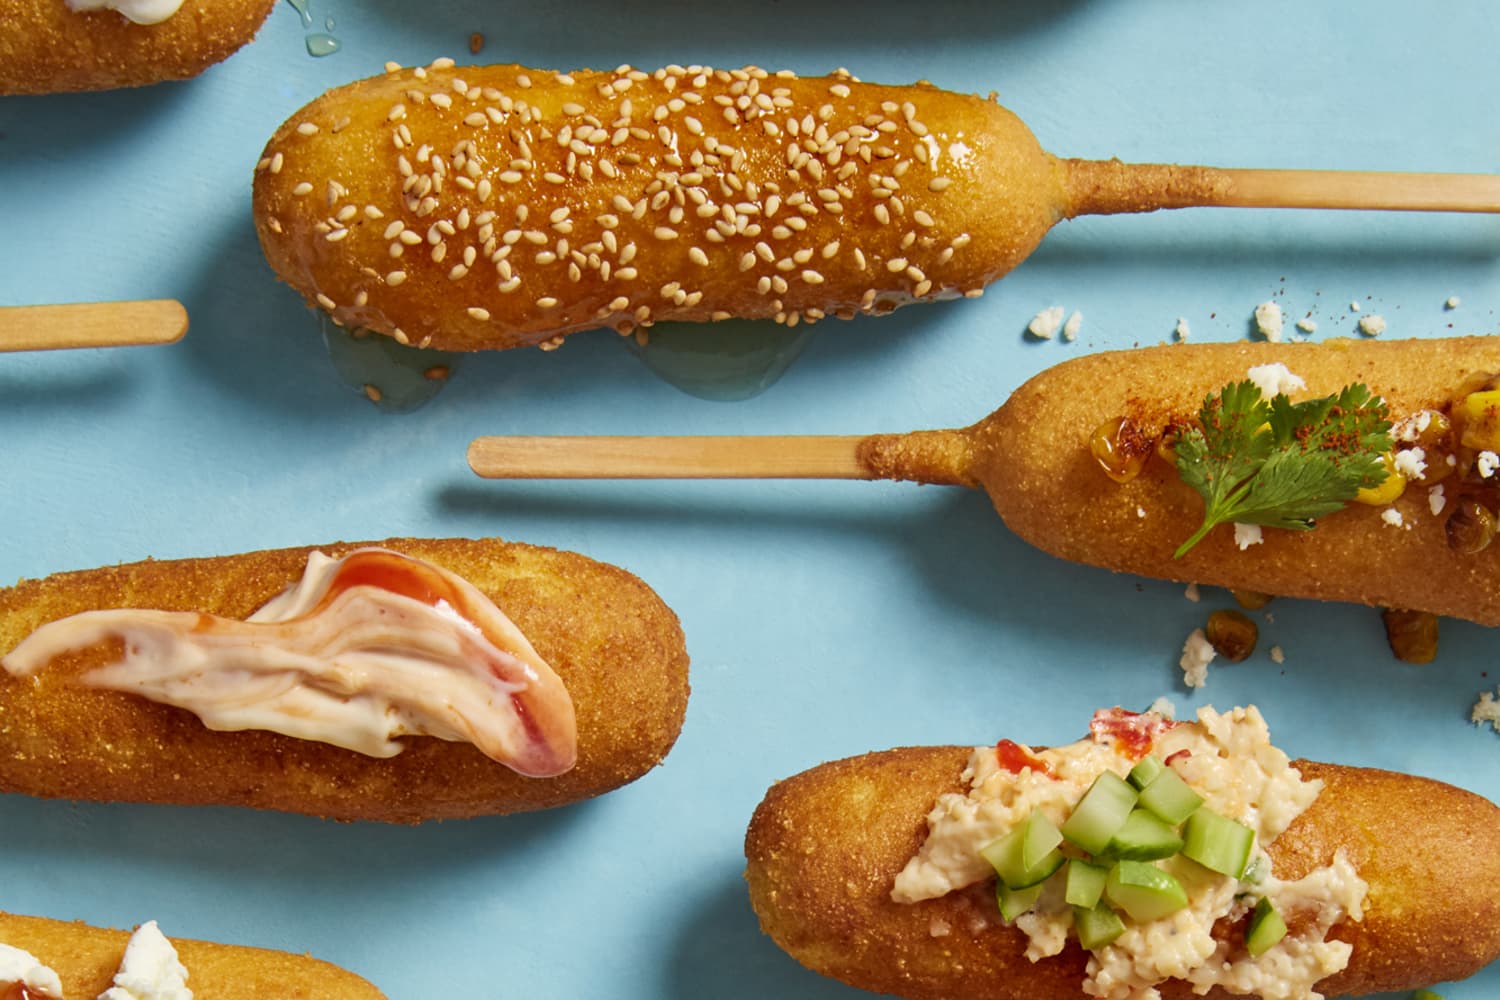 10 Easy Ways to Dress Up a Corn Dog - The Kitchn